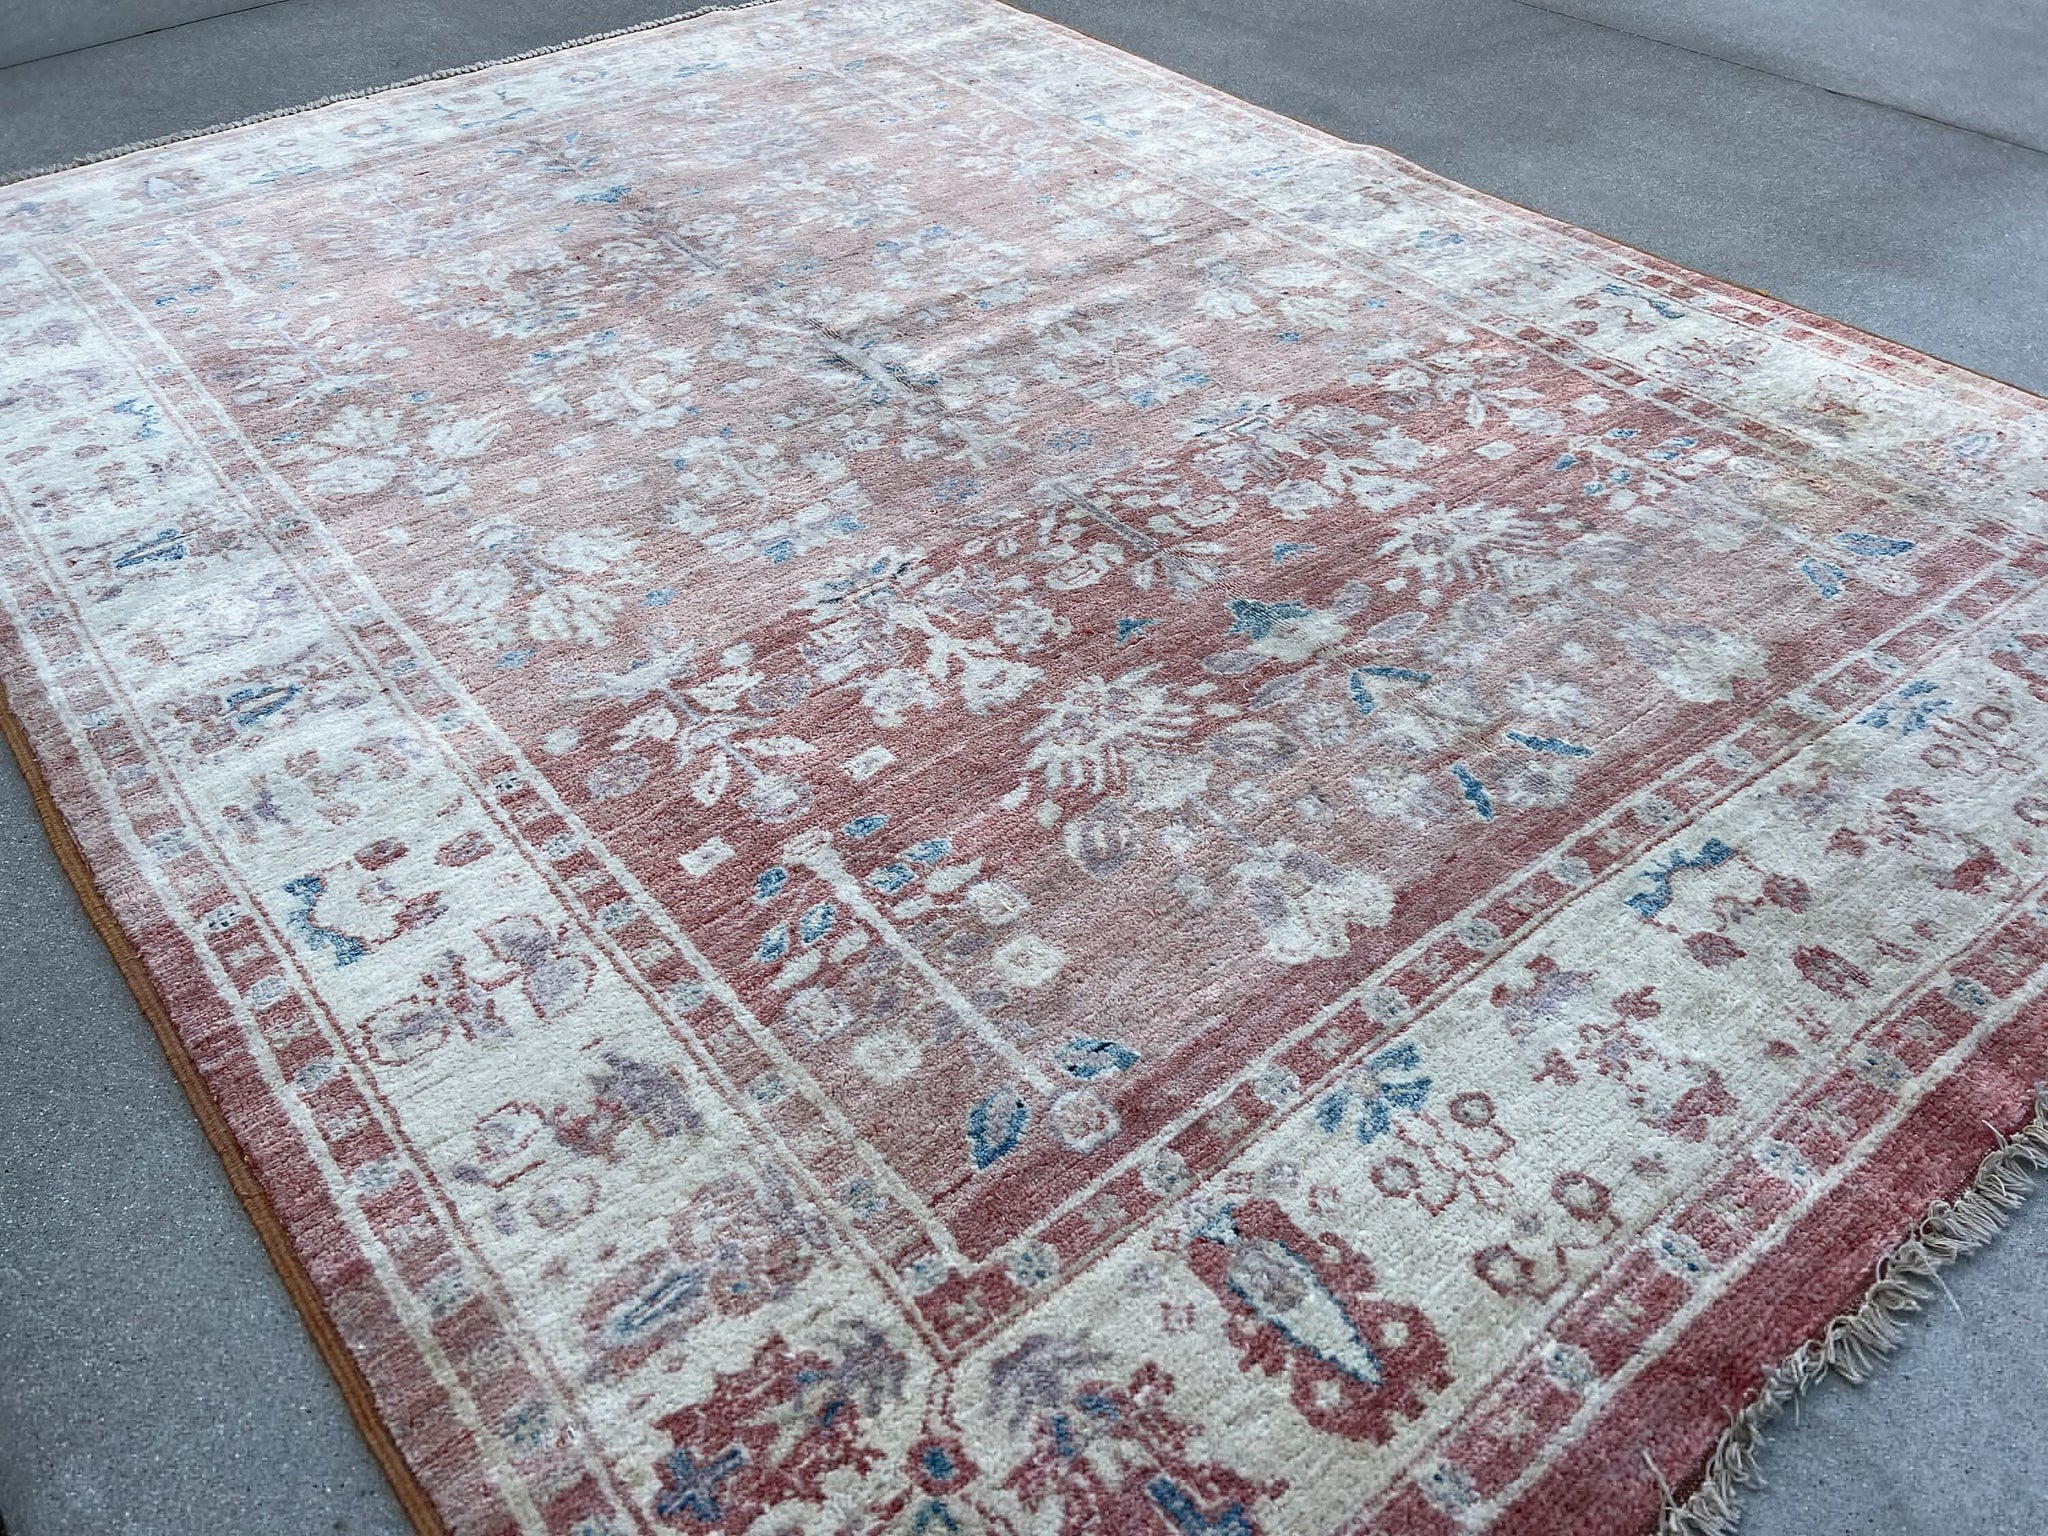 6x8 (180x245) Vintage Handmade Afghan Rug | Muted Coral Salmon Pink Cream Beige Teal Tan Caramel | Hand Knotted Oriental Floral Wool Persian